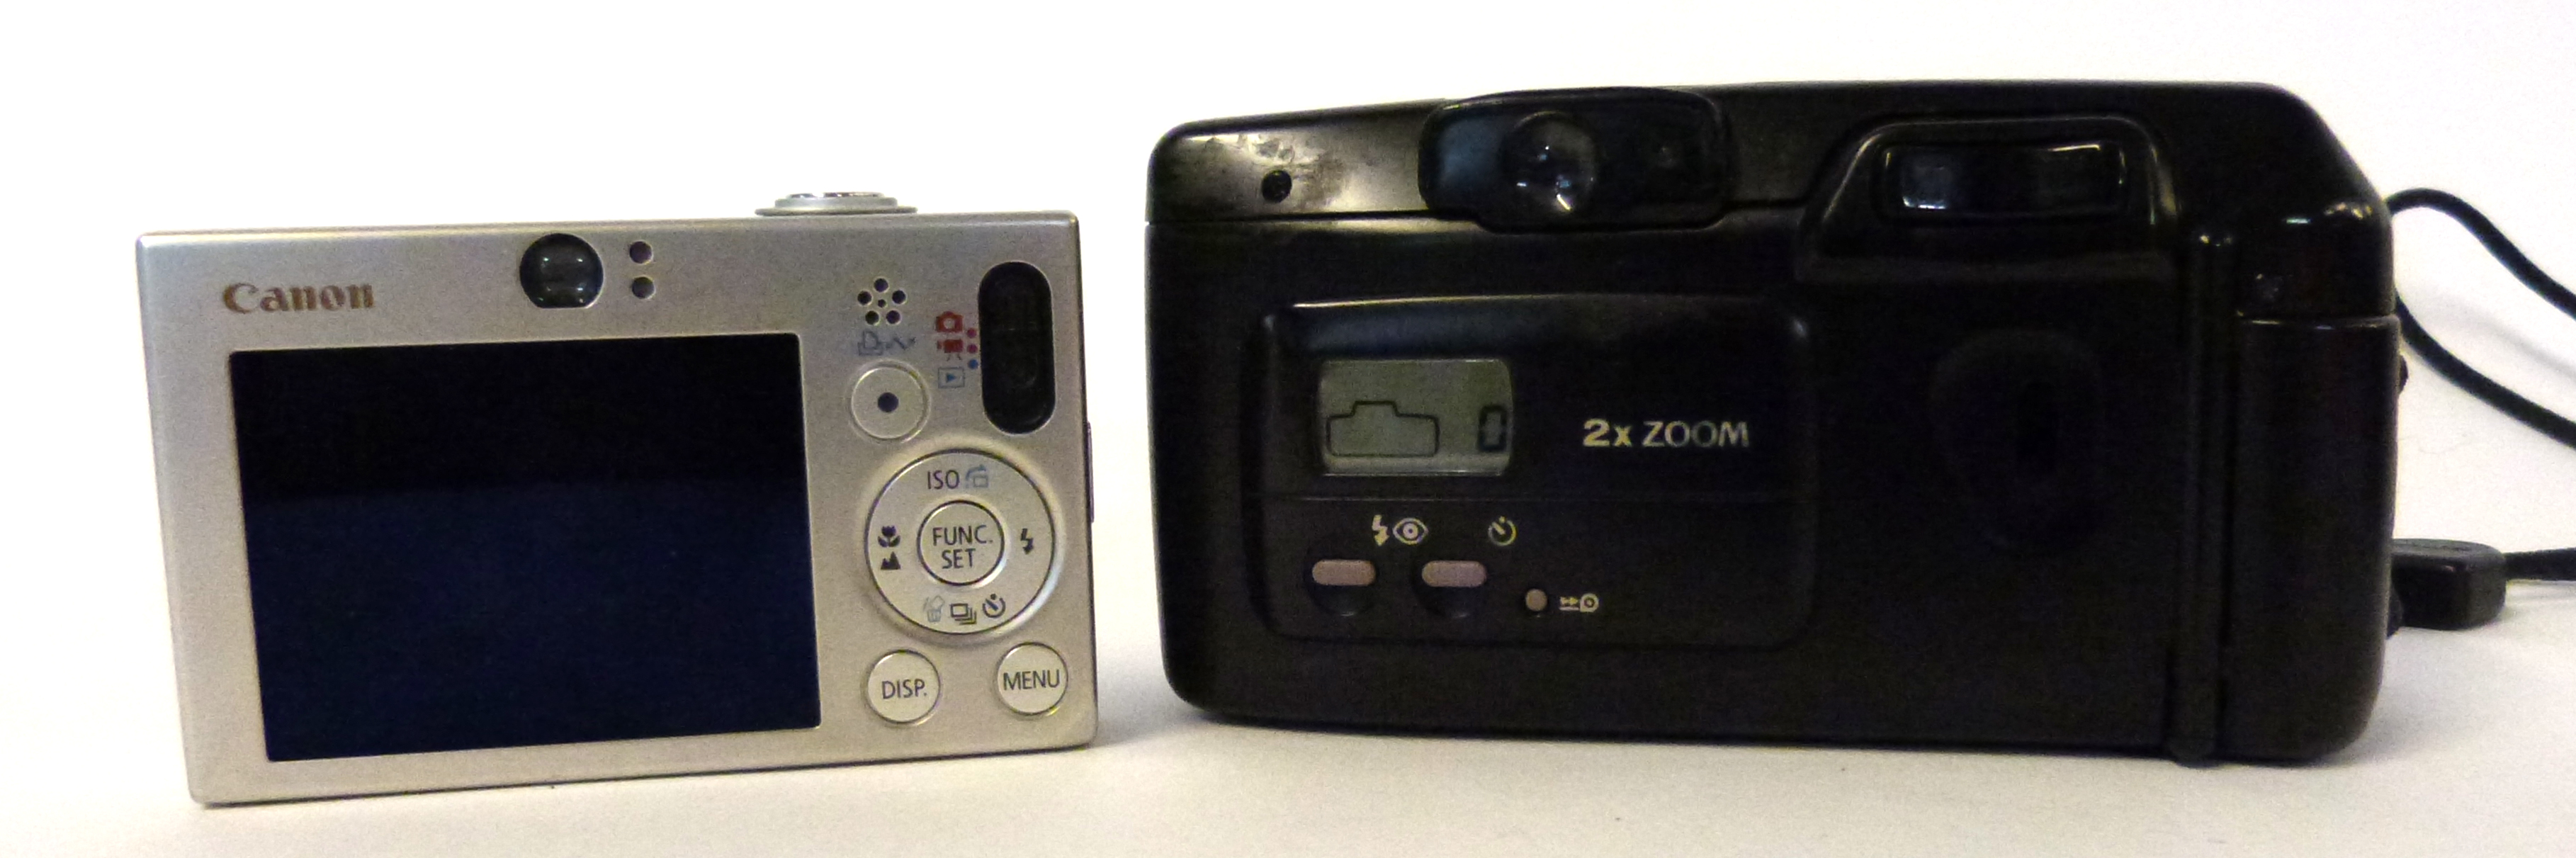 Canon Ixus 70 in box with accessories plus Canon Sureshot 70 zoom in box and accessories - Image 3 of 3